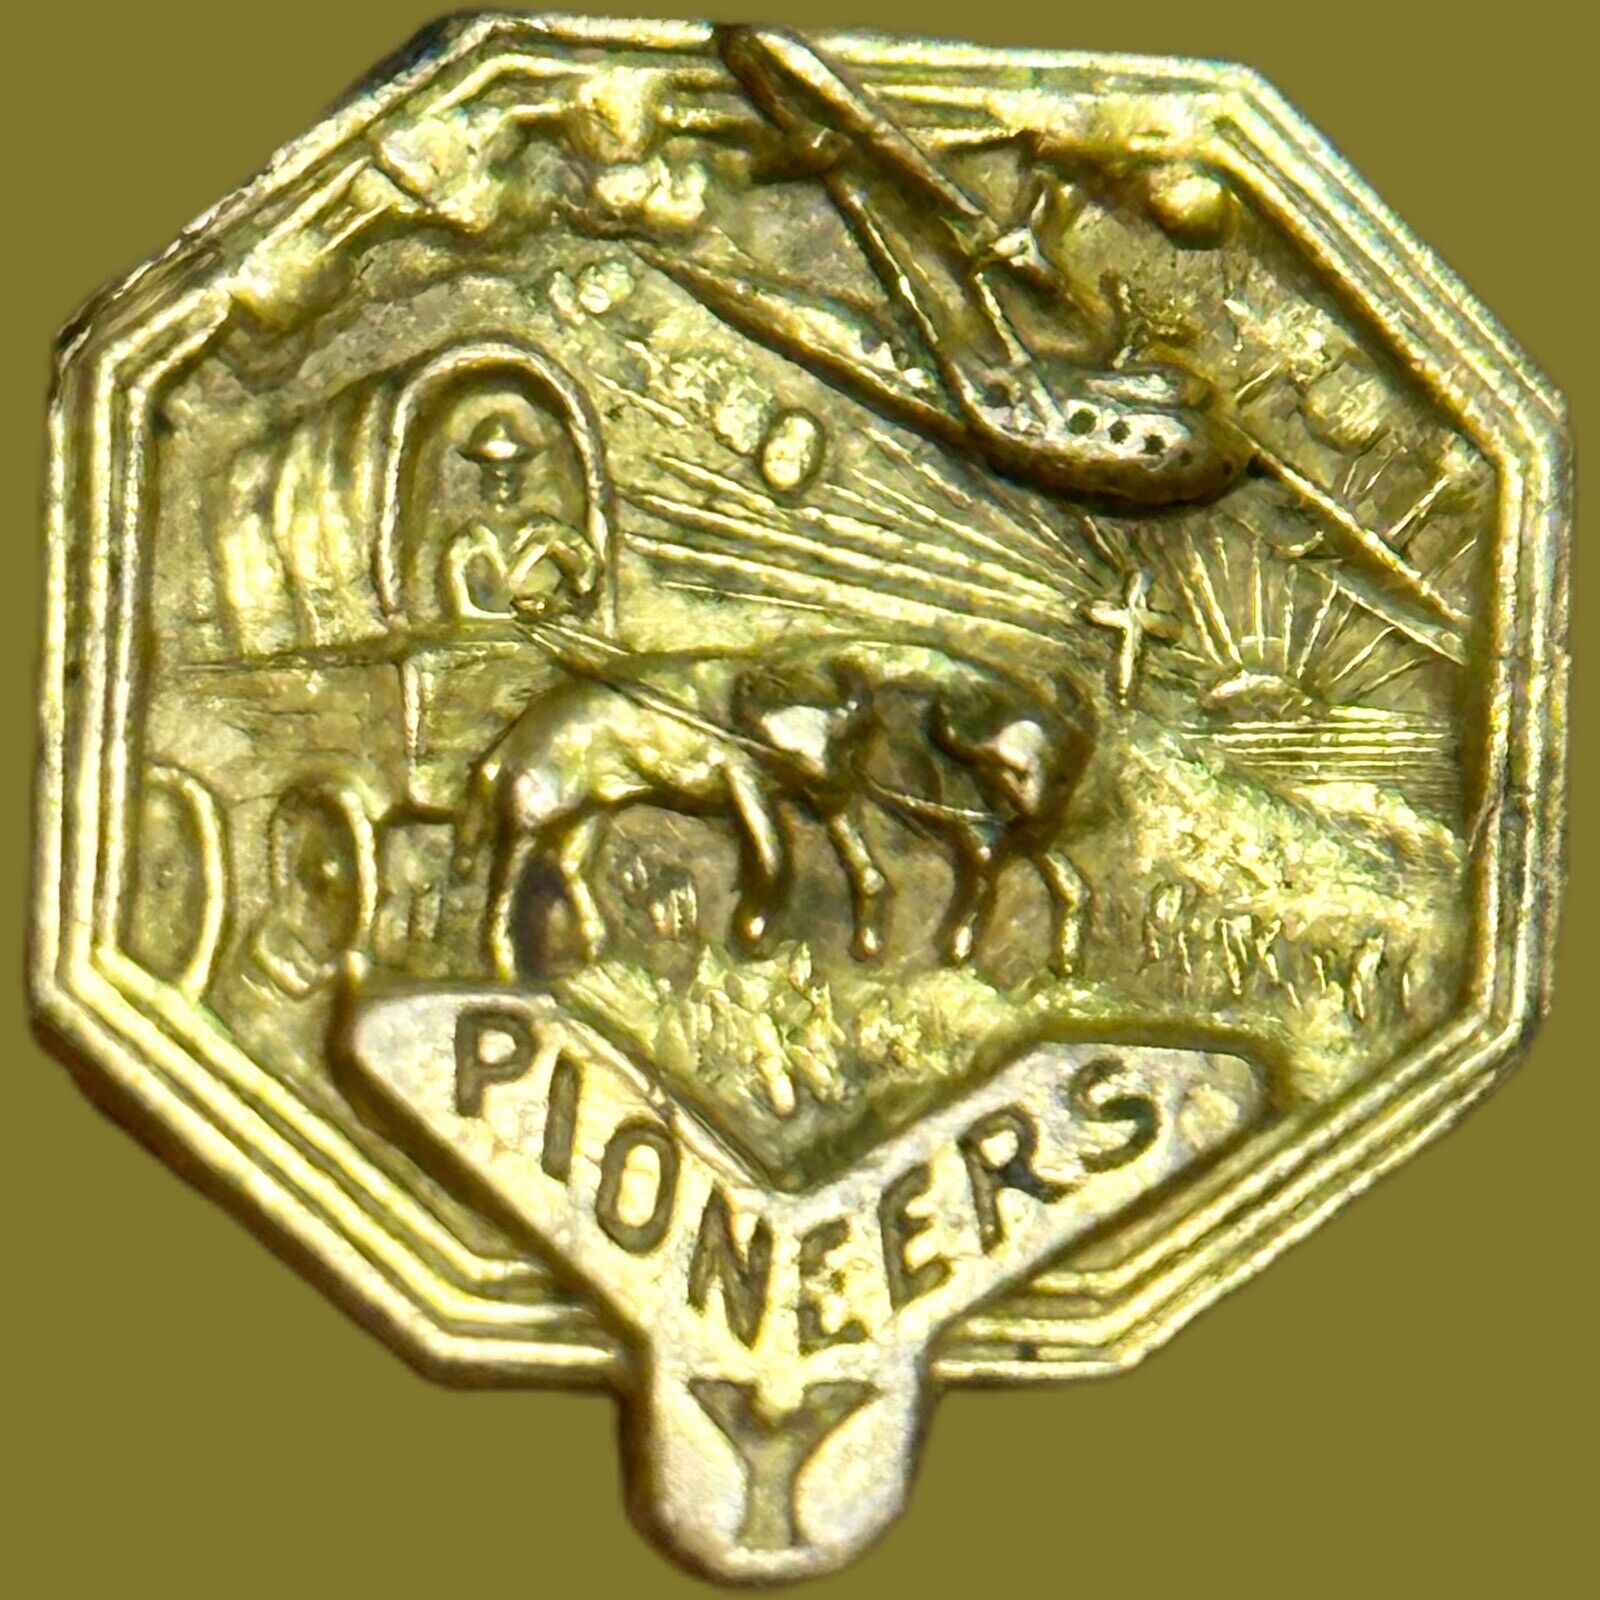 Vintage Early 1900s USA Pioneers Stagecoach Howard Hughes Aircraft Screwback Pin